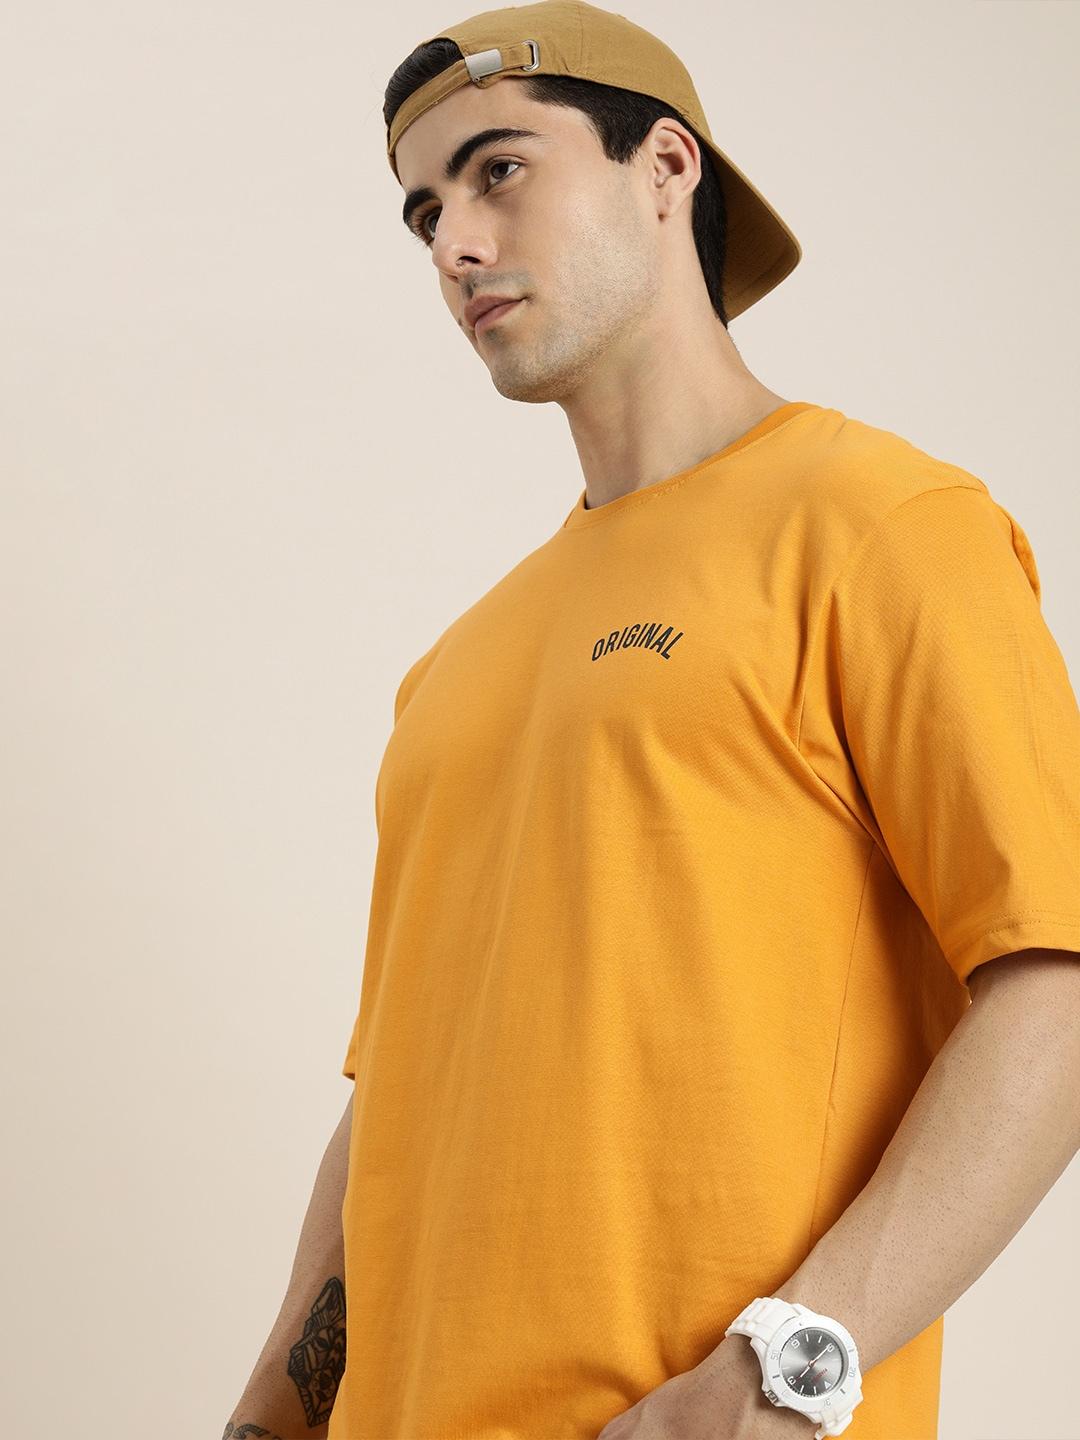 dillinger-men-mustard-yellow-typography-printed-pure-cotton-loose-oversized-t-shirt